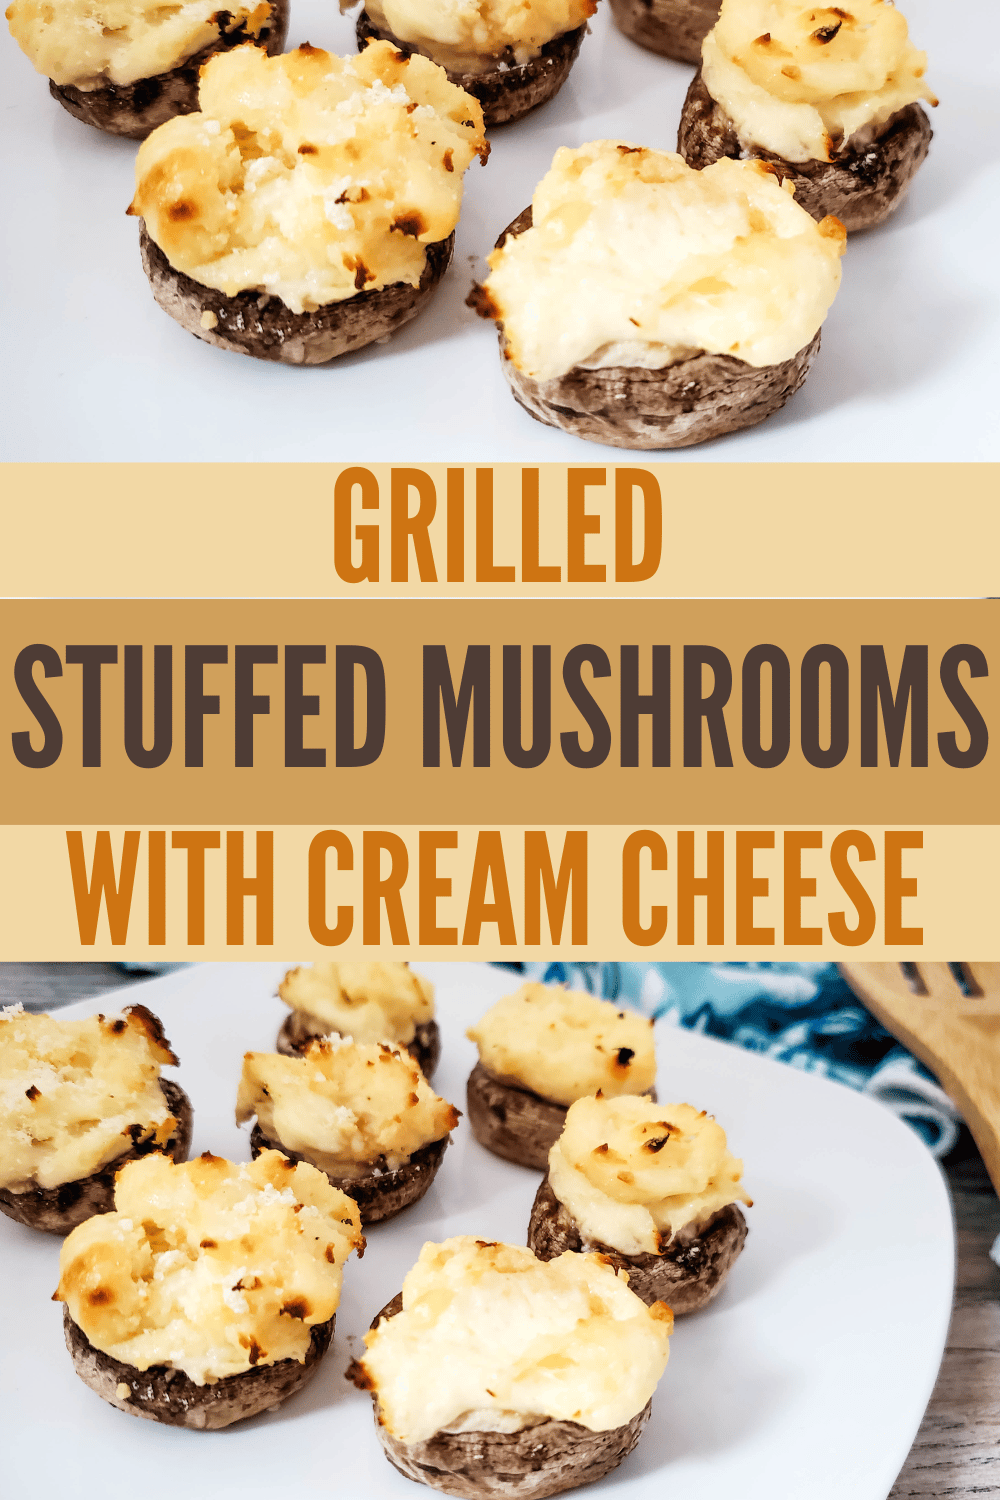 These Grilled Stuffed Mushrooms with Cream Cheese are the perfect appetizer for your next party! They’re easy to make and full of flavor. #grilledstuffedmushrooms #stuffedmushrooms #creamcheese #appetizer #recipe via @wondermomwannab